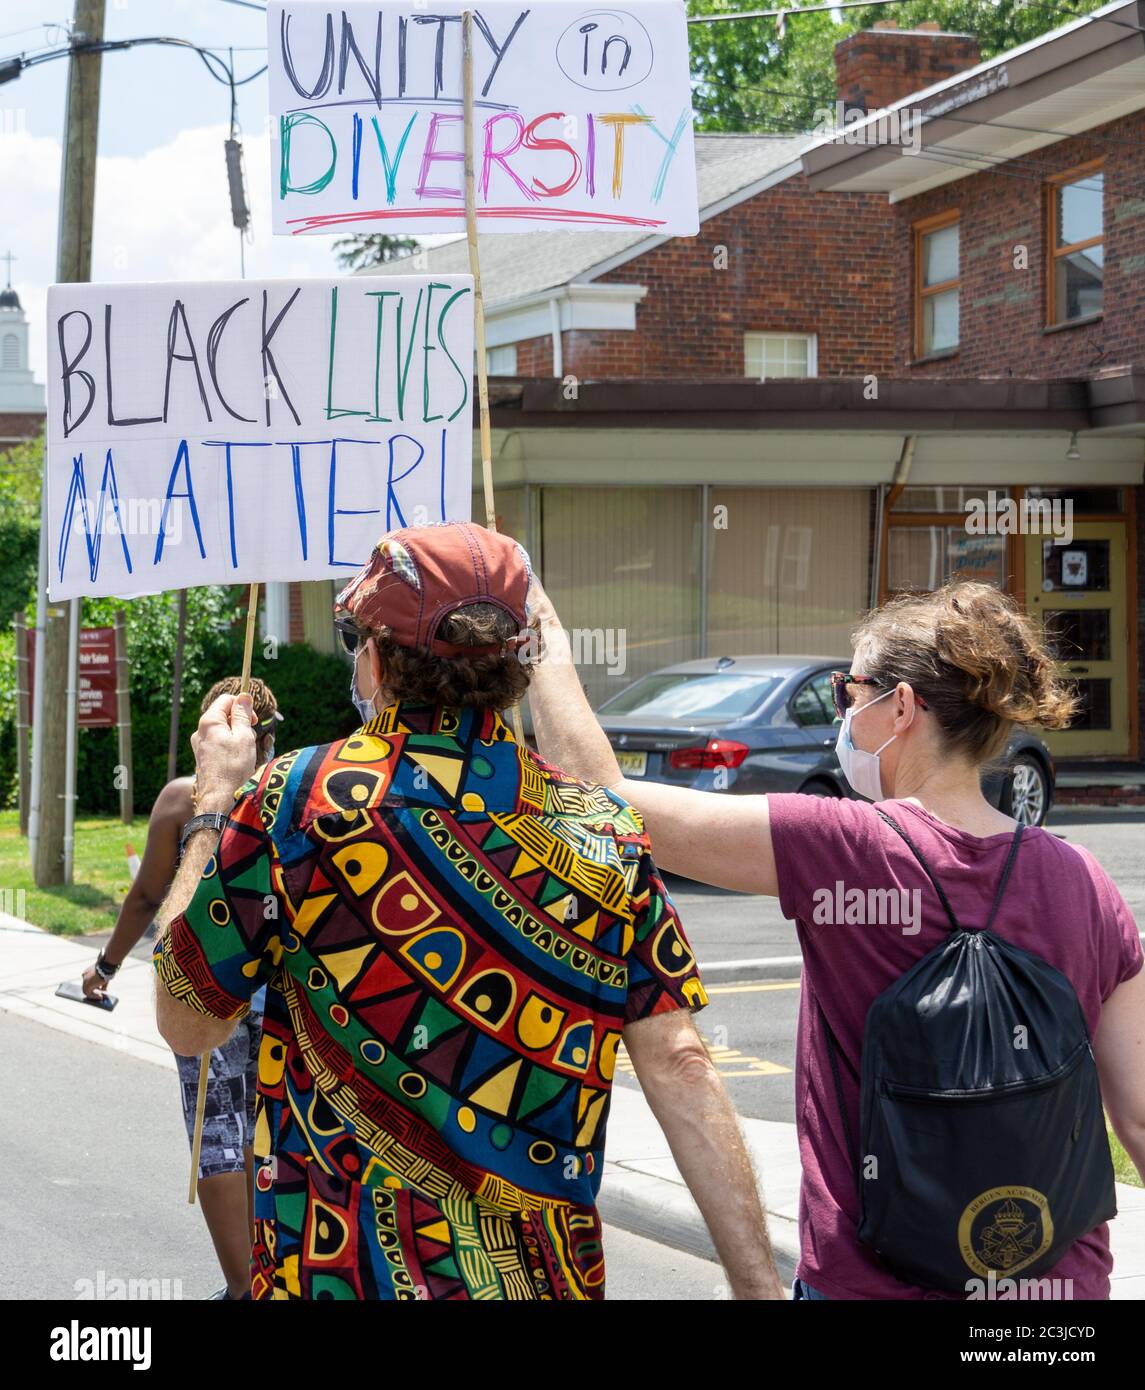 Juneteenth March Black Lives Matter Protest George Floyd - couple protesting together walking in streets and holding signs Unity in Diversity black li Stock Photo